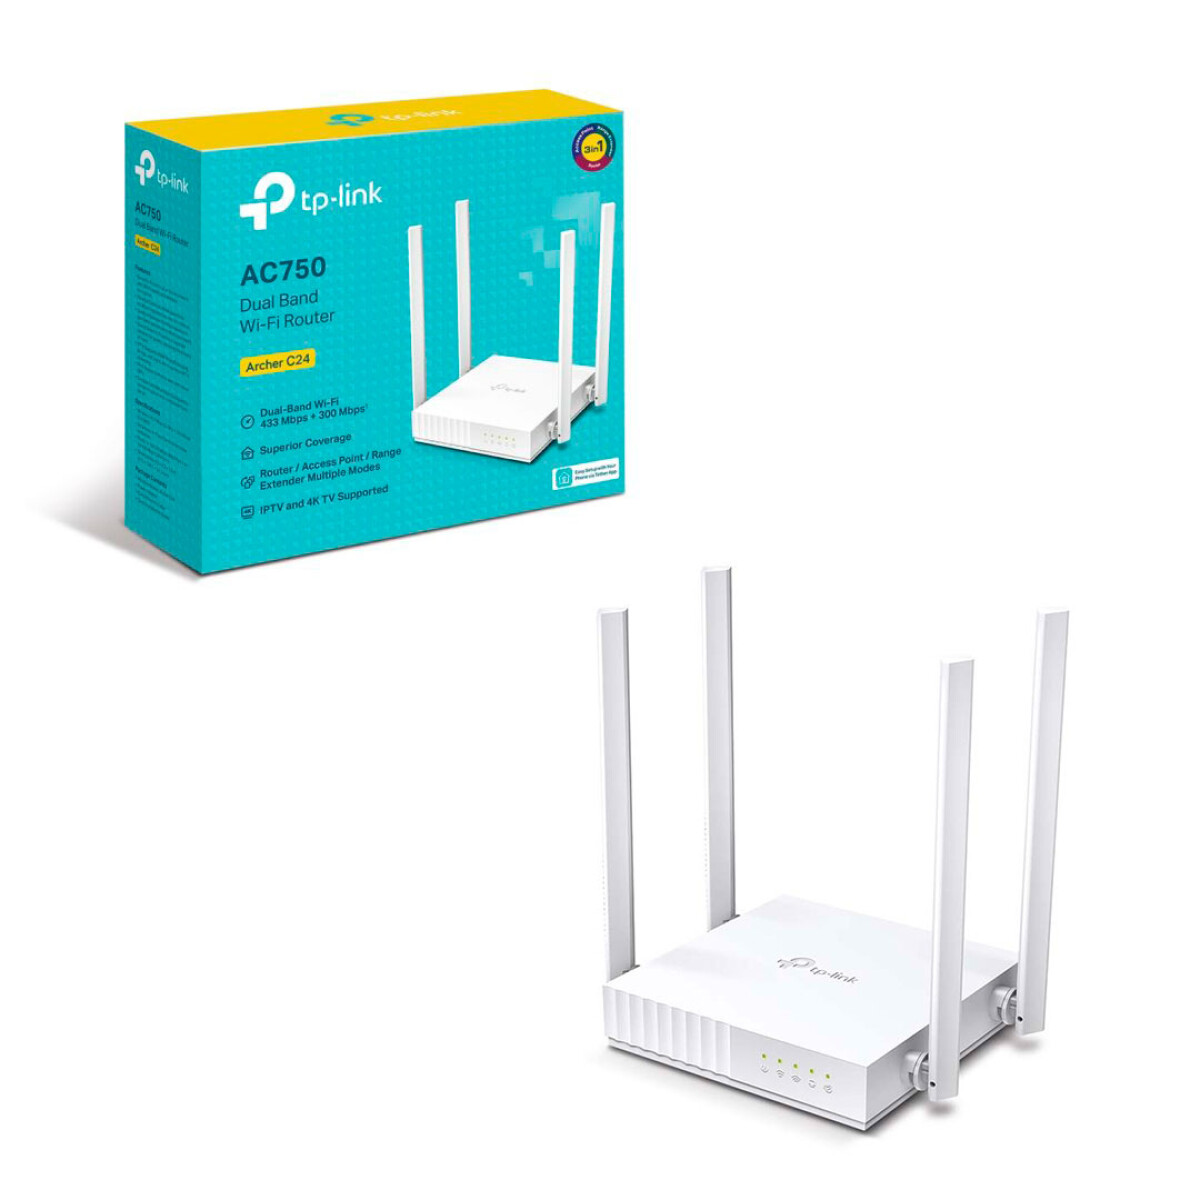 Router TP-Link Archer C24 Wireless Dual Band AC750 - 001 